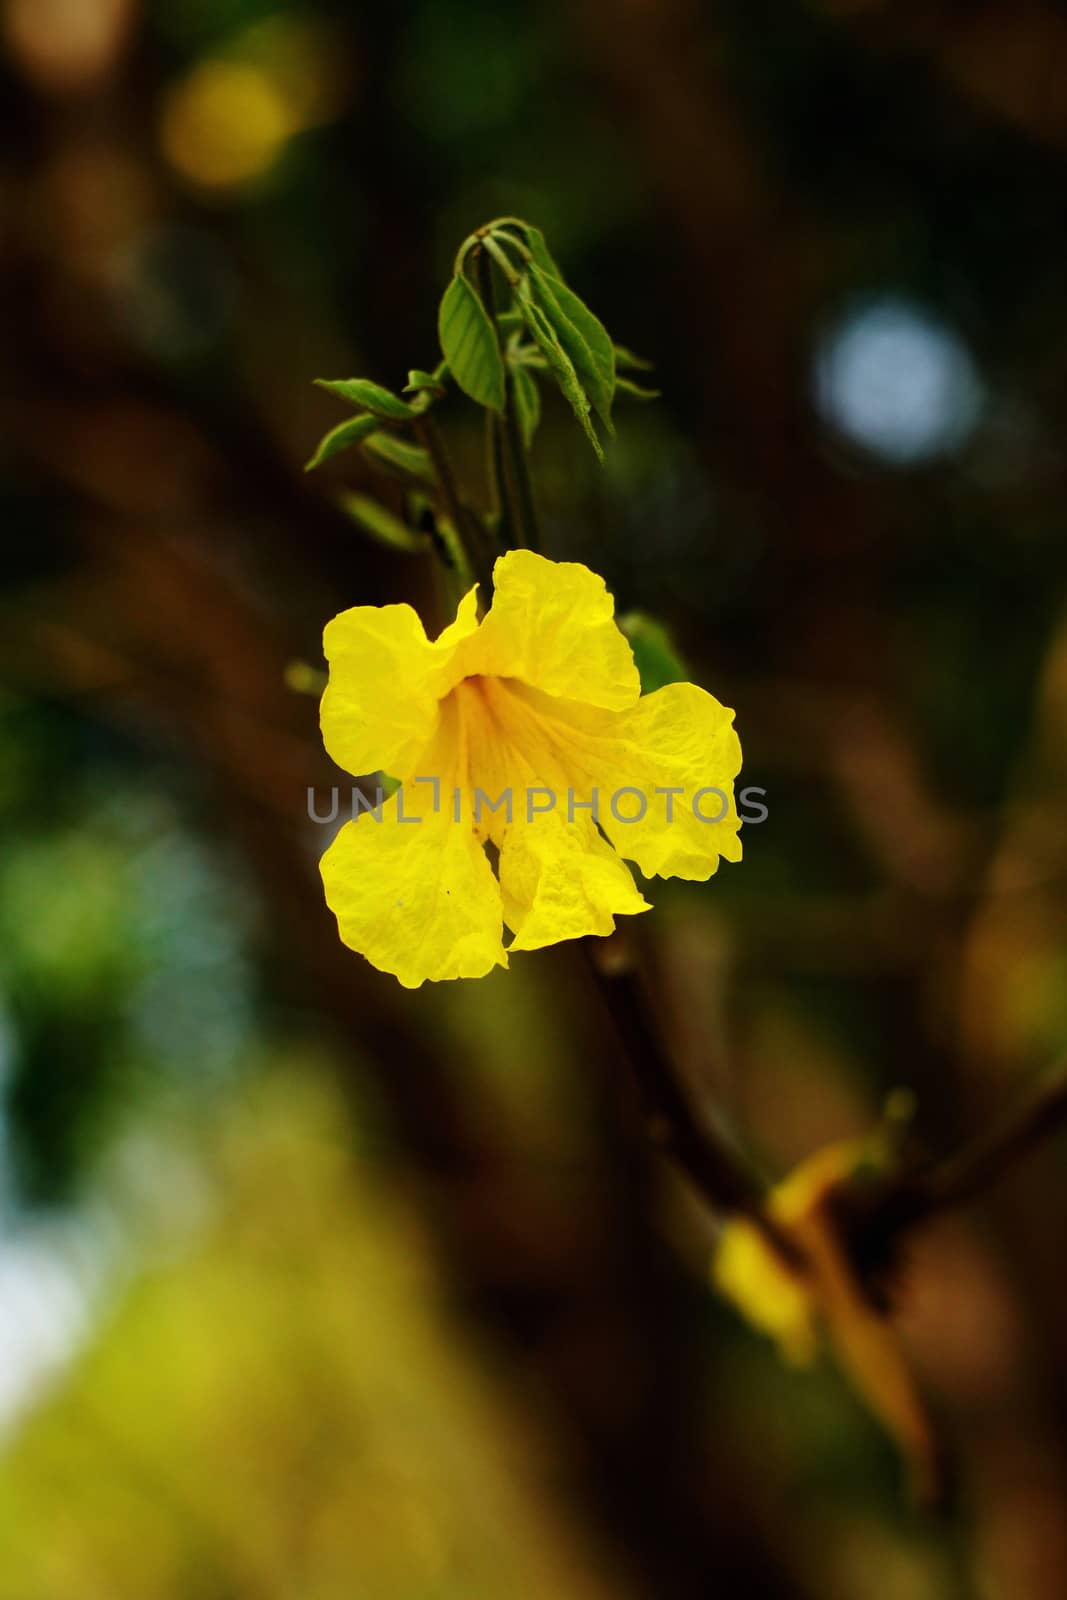 Yellow tabebuia, Trumpet flower in blurred background